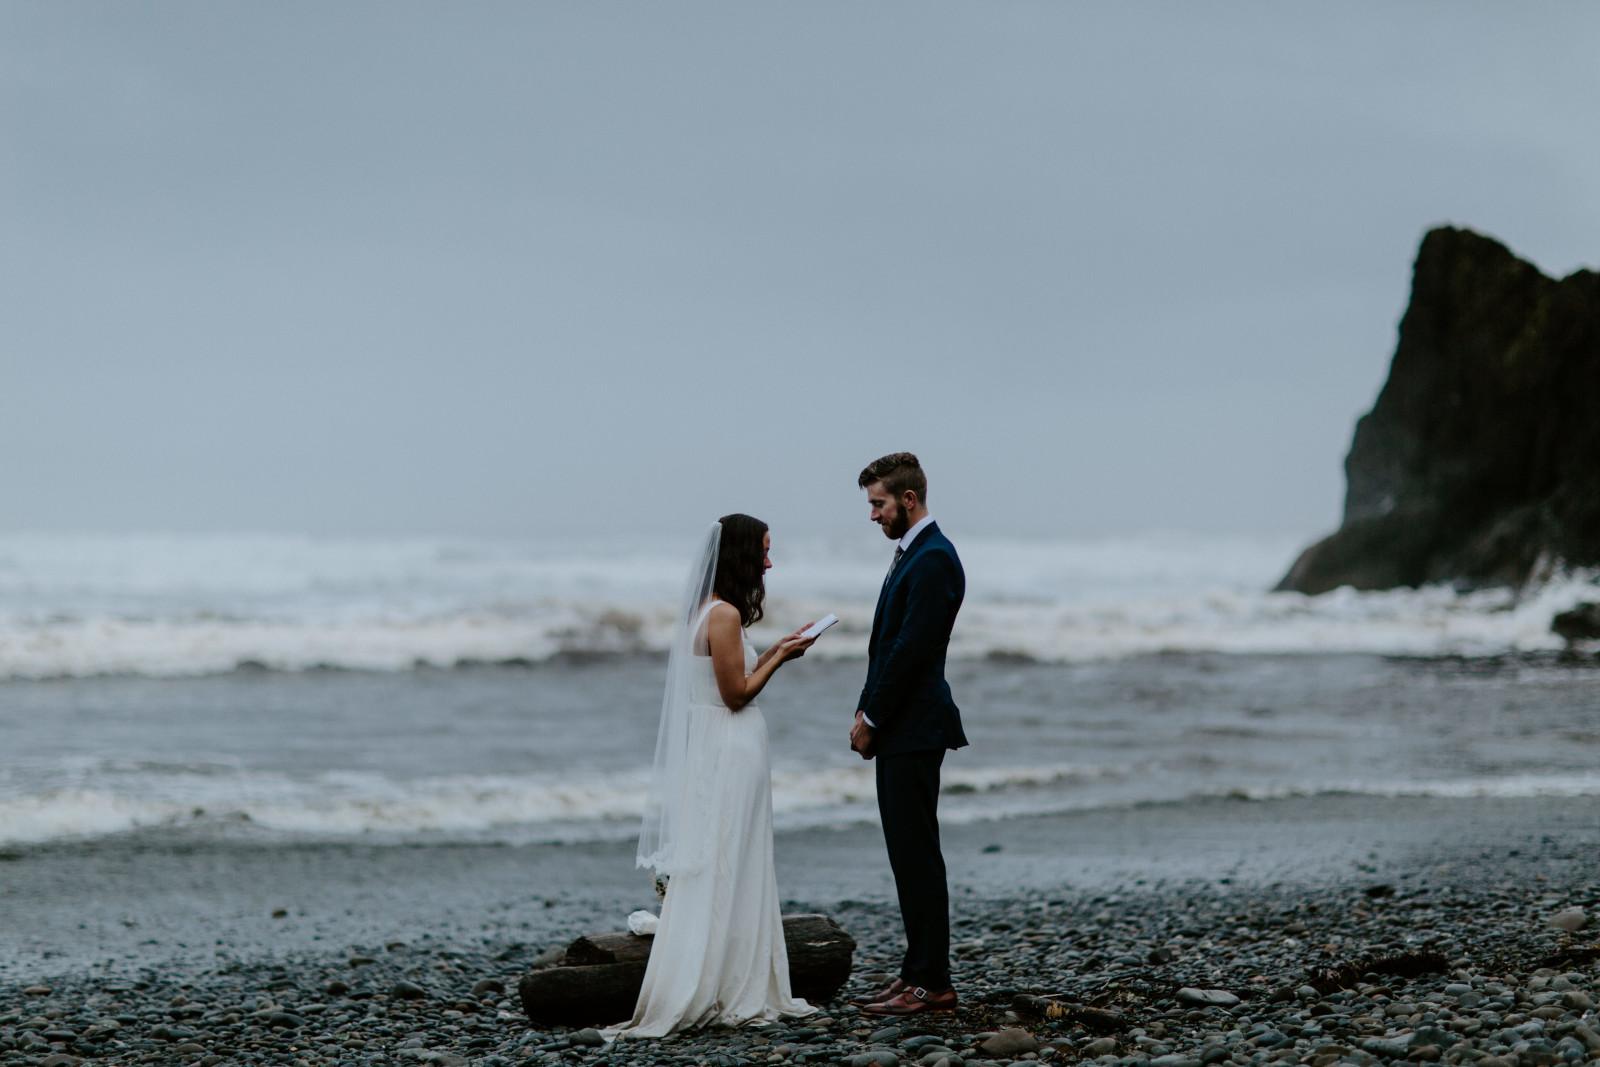 Corey and Mollie on the beach. Elopement photography in the Olympic National Park by Sienna Plus Josh.